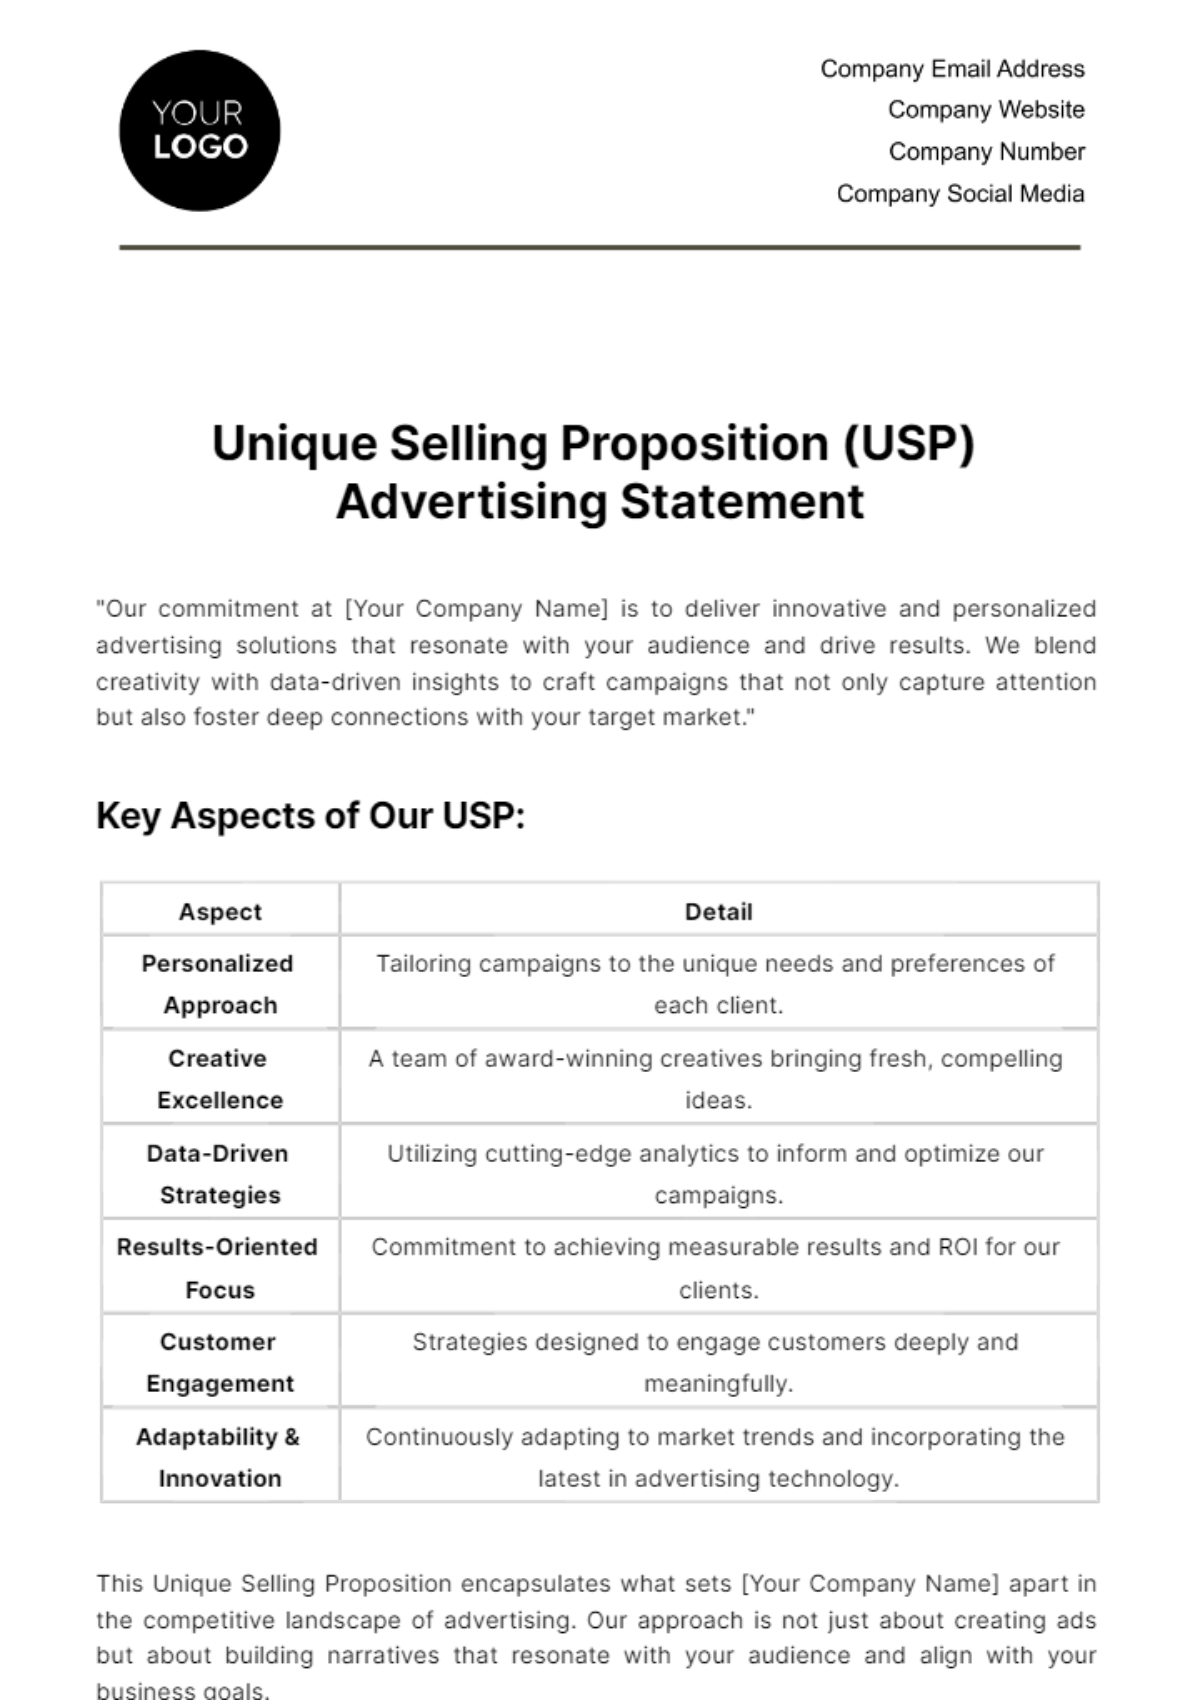 Free Unique Selling Proposition (USP) Advertising Statement Template